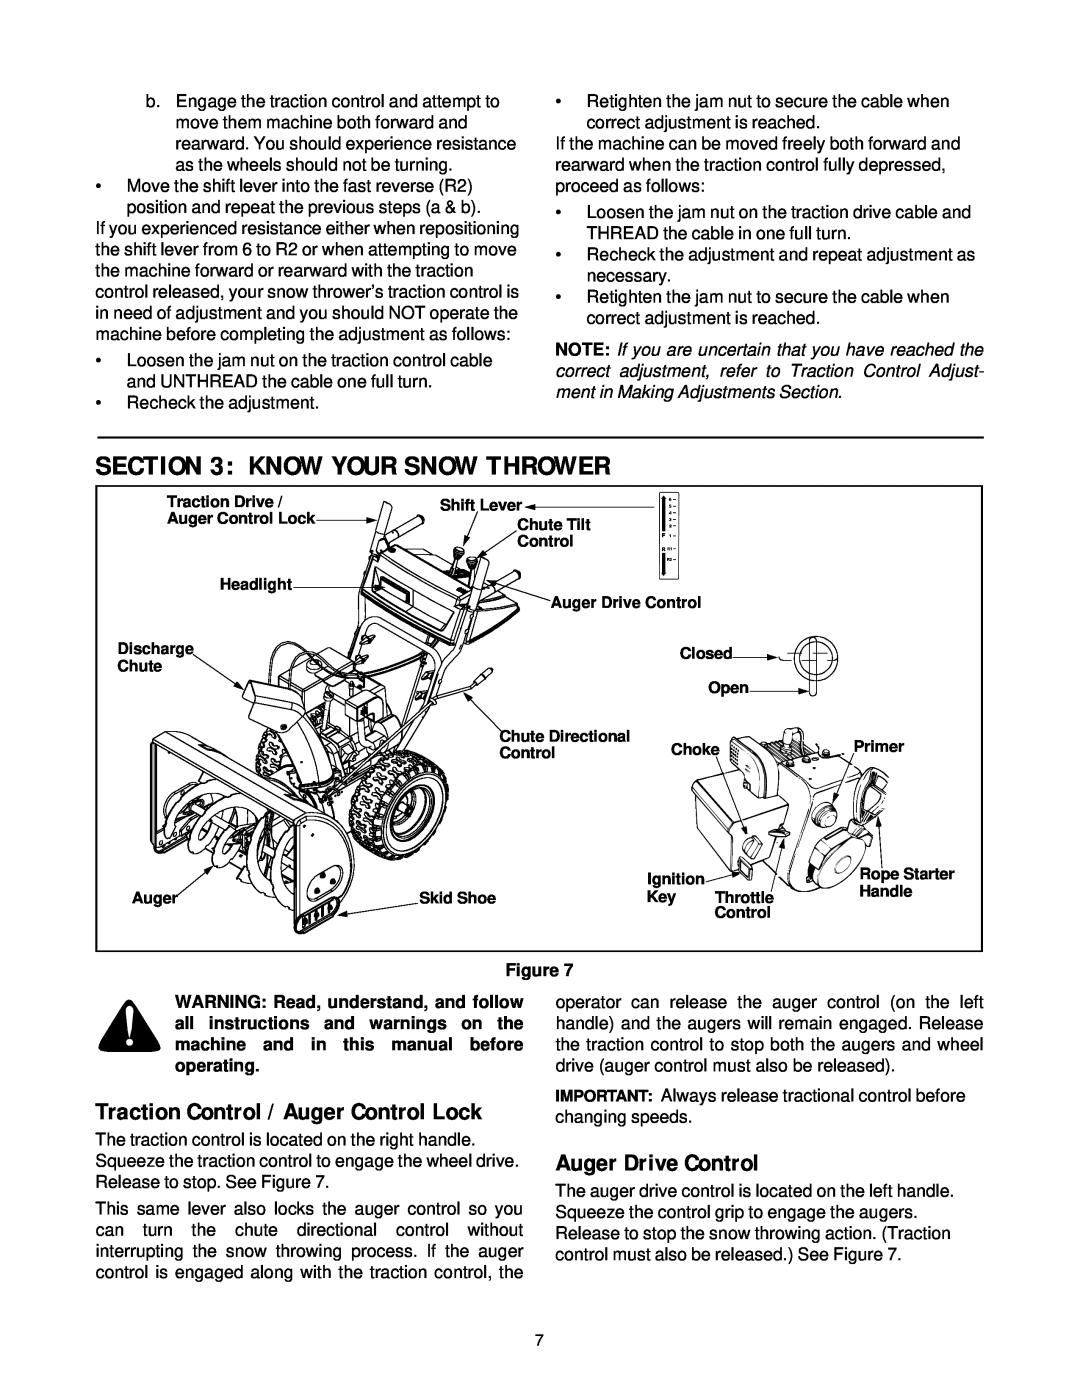 Bolens 750, 550 manual Know Your Snow Thrower, Auger Drive Control, Traction Control / Auger Control Lock, Figure 